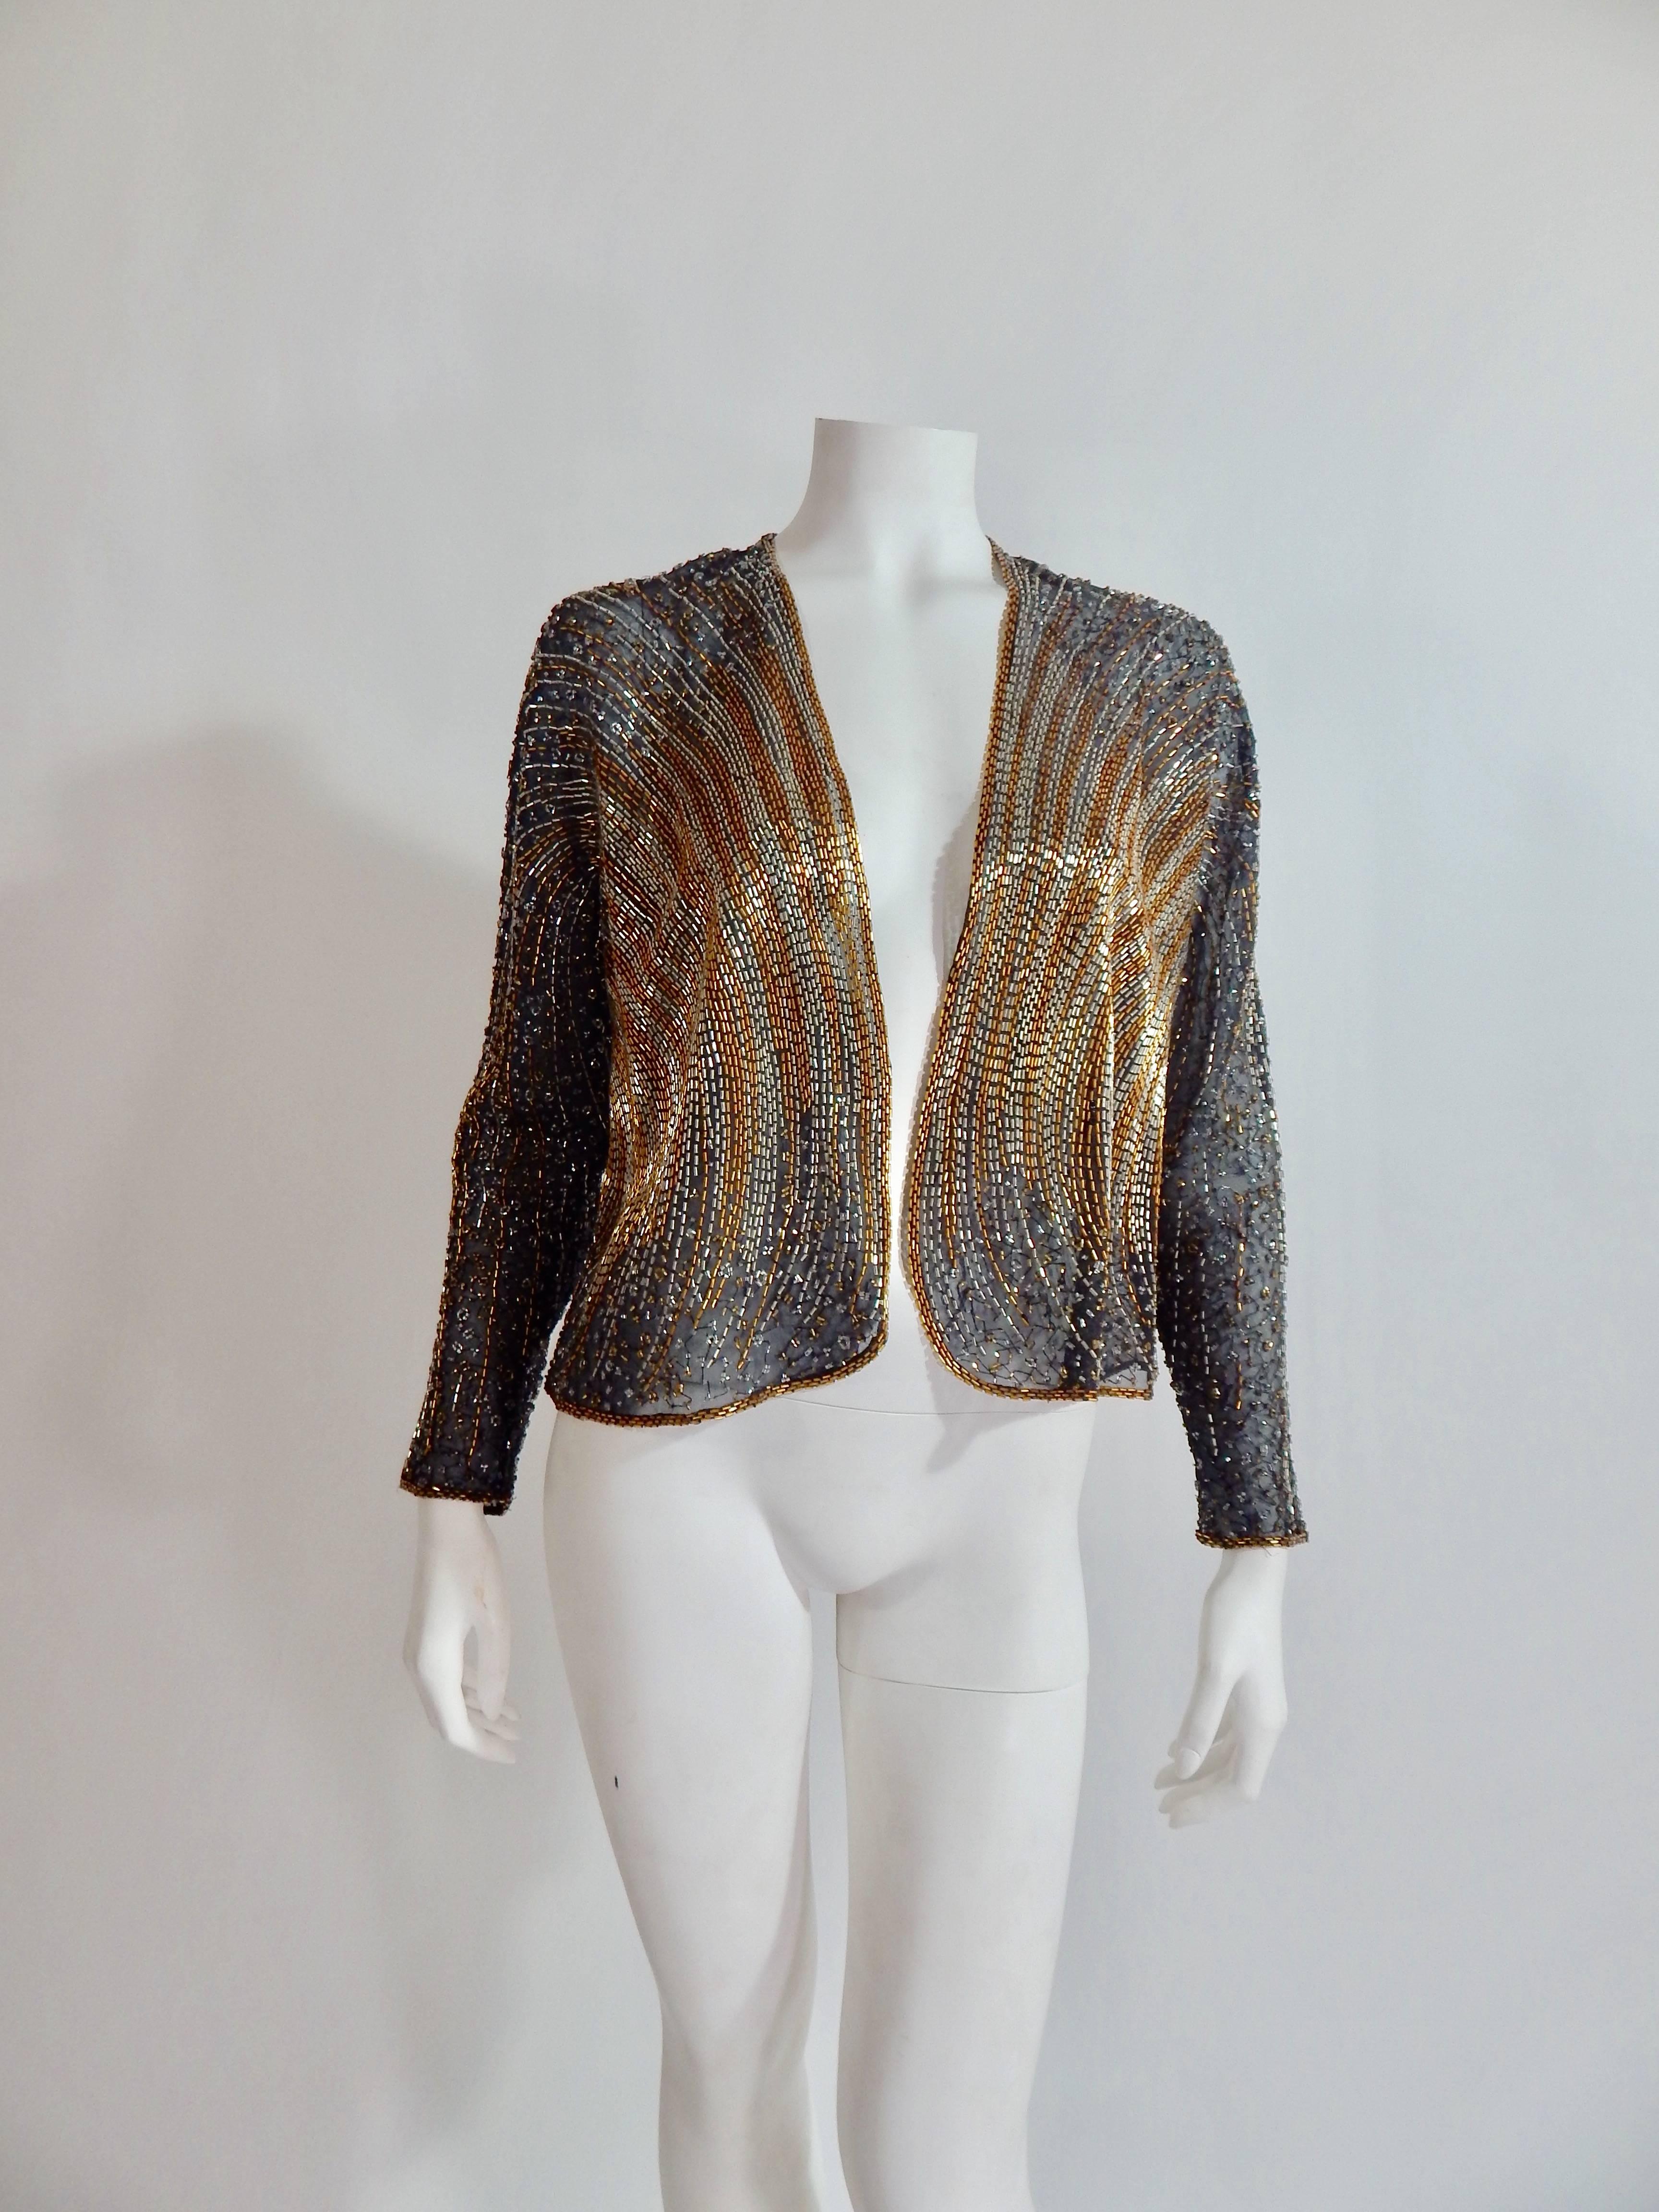 Fabulous 1970s / 1980s Vintage Halston Beaded Cover or Jacket. Sheer black with black, silver and gold beading. Bead work design in the style of disco and art deco. Versatile with formal gown or dress up denim. Tag reads size 4.